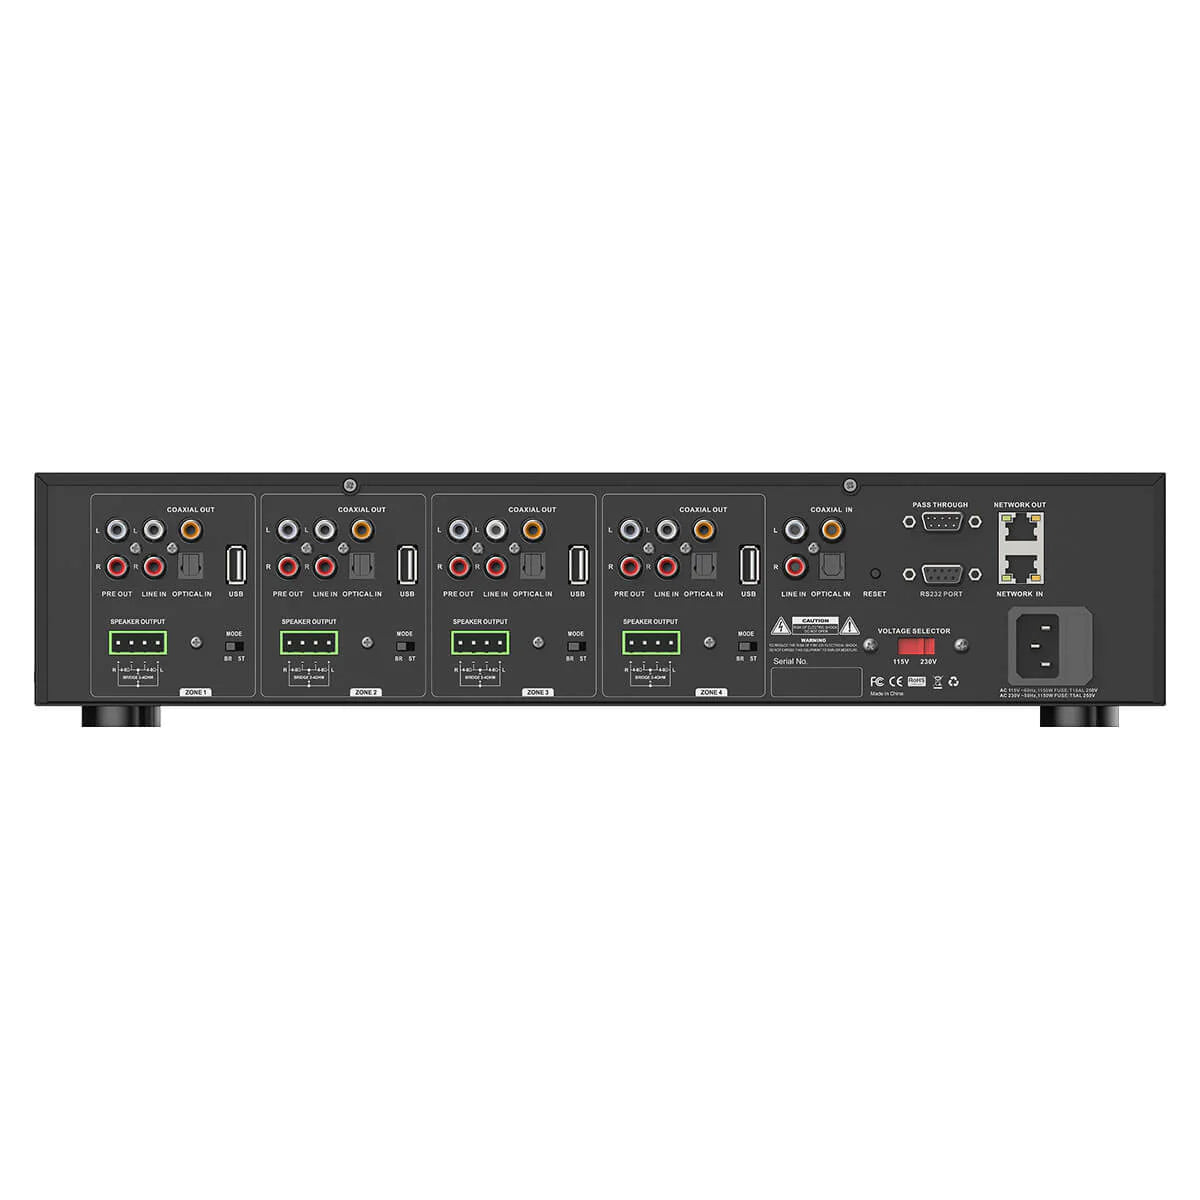 Specification Newest Firmware Version 4.6.519433.45  Streaming Protocol Spotify Connect, Tidal Connect, Airplay2, DLNA, UPnP, Qplay  Power Input 115-230V AC 50/60Hz  Network RJ45 Ethernet In RJ45 Ethernet Out  Audio Input 4 Zone Audio I/O: Analog RCA(2Vrms)  Digital Optical Input(PCM, Max 192kHz/24bit sample rate decode)  Master Audio I/O: Analog RCA(2Vrms)  Digital Optical Input(PCM, Max 192kHz/24bit sample rate decode) Coaxial Input(PCM, Max 192kHz/24bit sample rate decode)